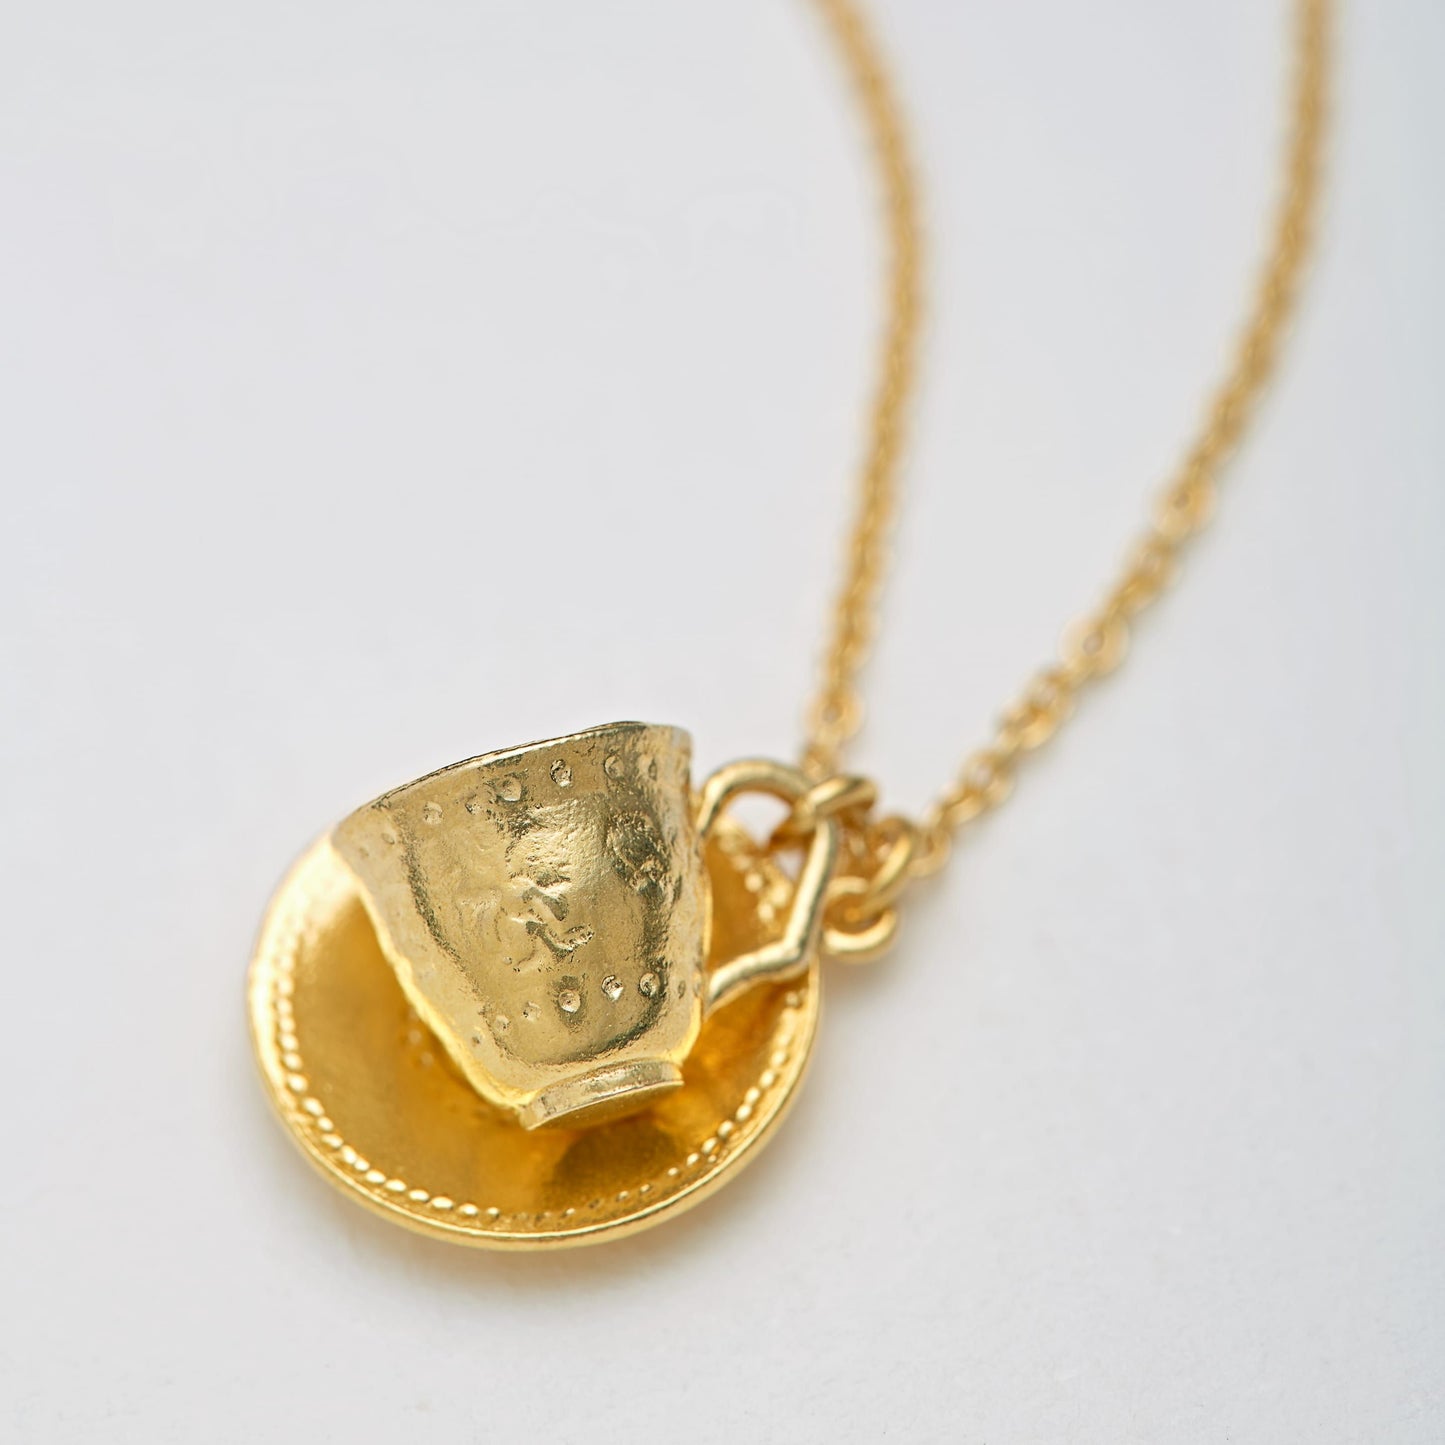 Teacup and Saucer Necklace